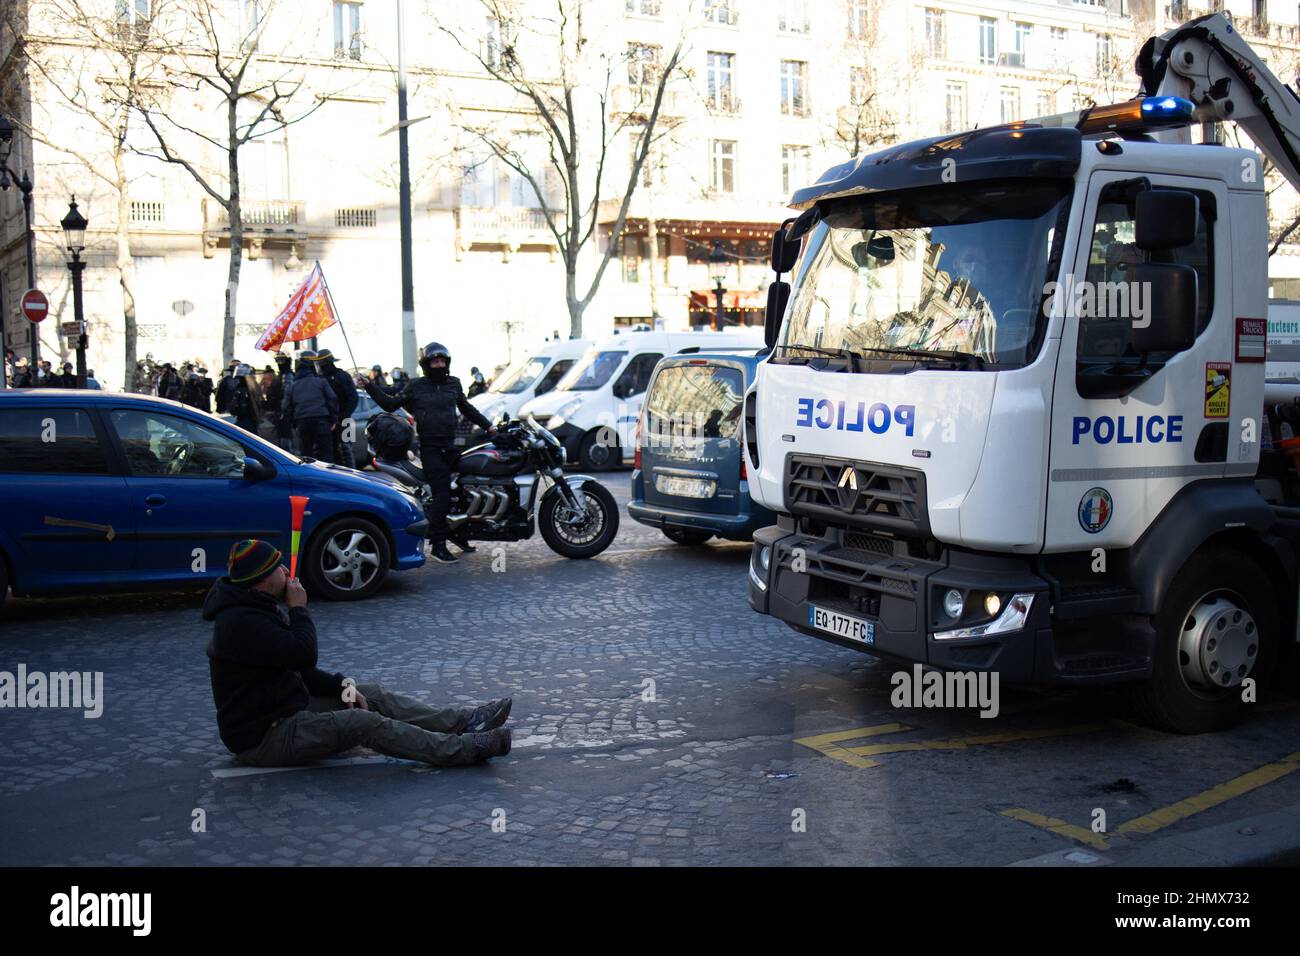 Protester next to a Police truck on the Champs Elysees in Paris near the Arc de Triomphe on February 12, 2022 as convoys of protesters so called Convoi de la Liberte arrived in the French capital. Thousands of protesters in convoys, inspired by Canadian truckers paralysing border traffic with the US, were heading to Paris from across France on February 11, with some hoping to blockade the capital in opposition to Covid-19 restrictions despite police warnings to back off. The protesters include many anti-Covid vaccination activists, but also people protesting against fast-rising energy prices t Stock Photo